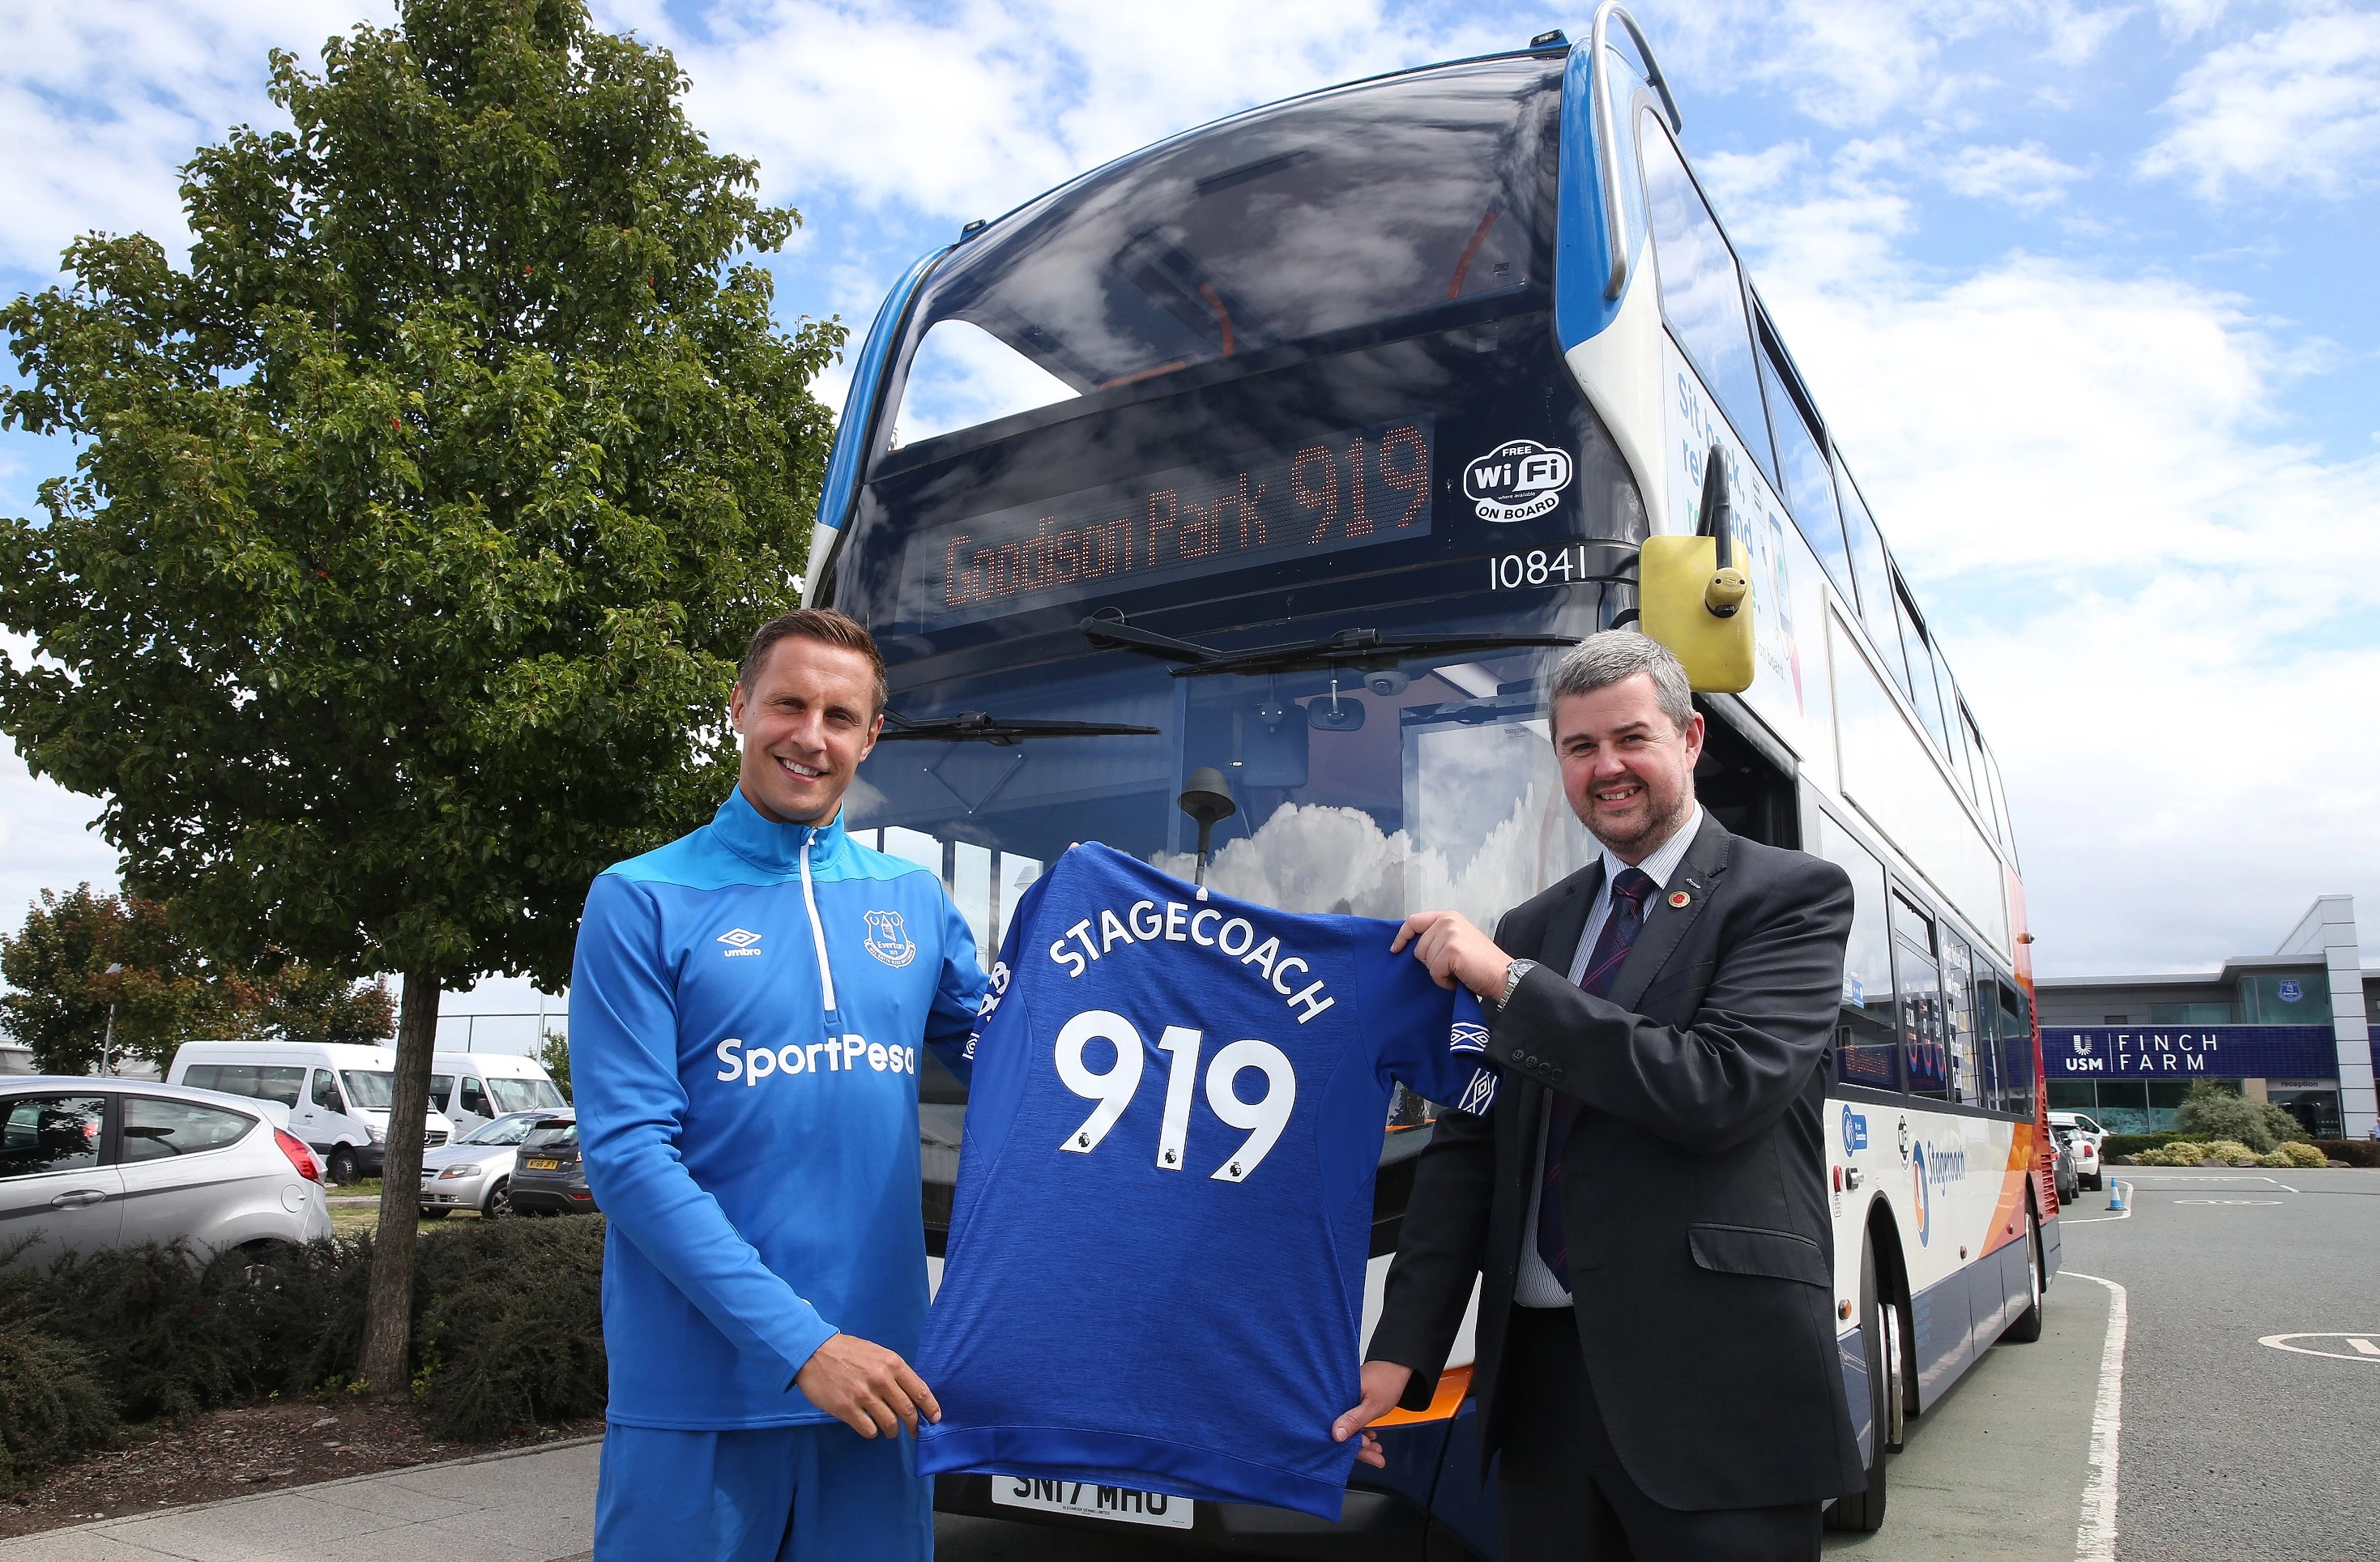 Everton and Stagecoach